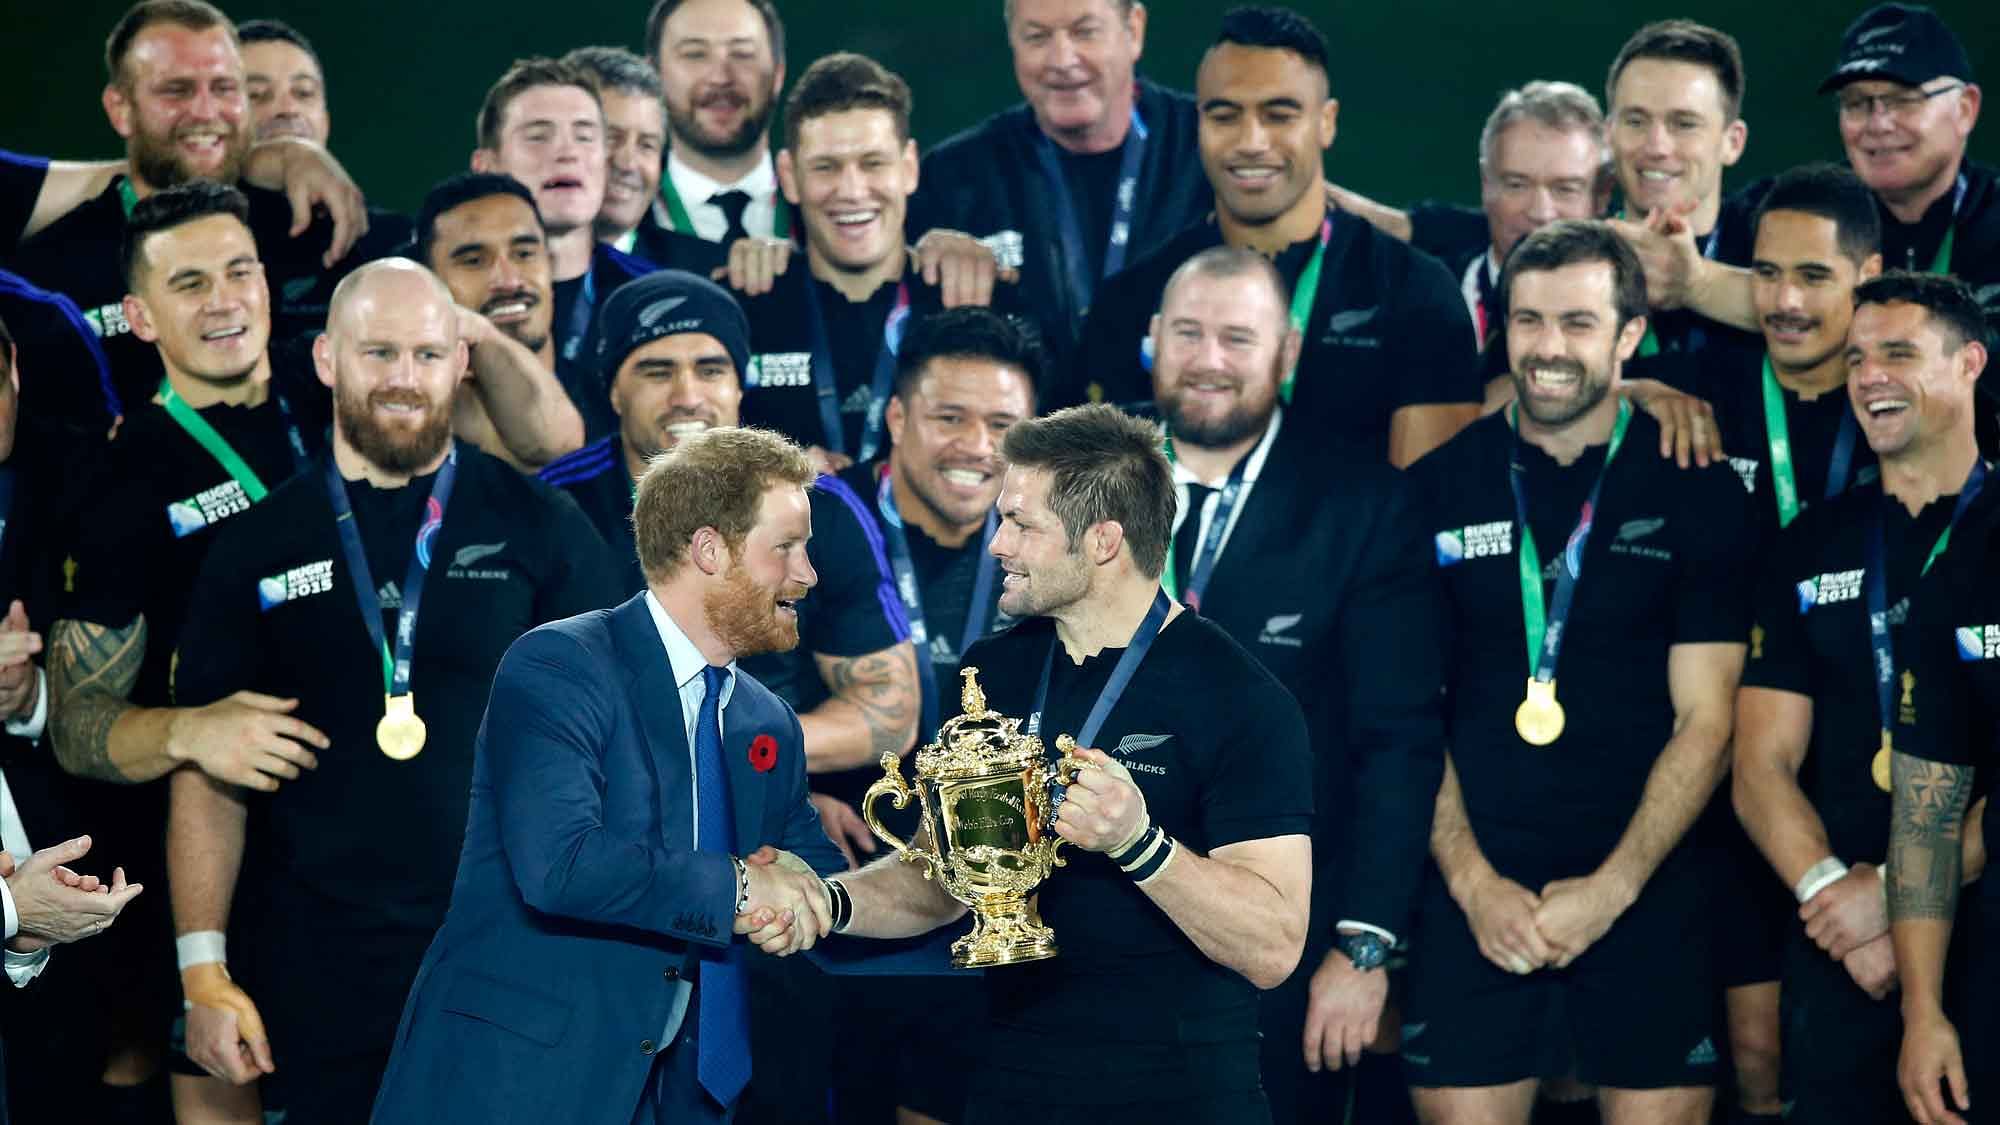 Britain’s Prince Harry presents the Webb Ellis trophy to New Zealand’s Richie McCaw after they defeated Australia 34-17 in the Rugby World Cup final. (Photo: AP)